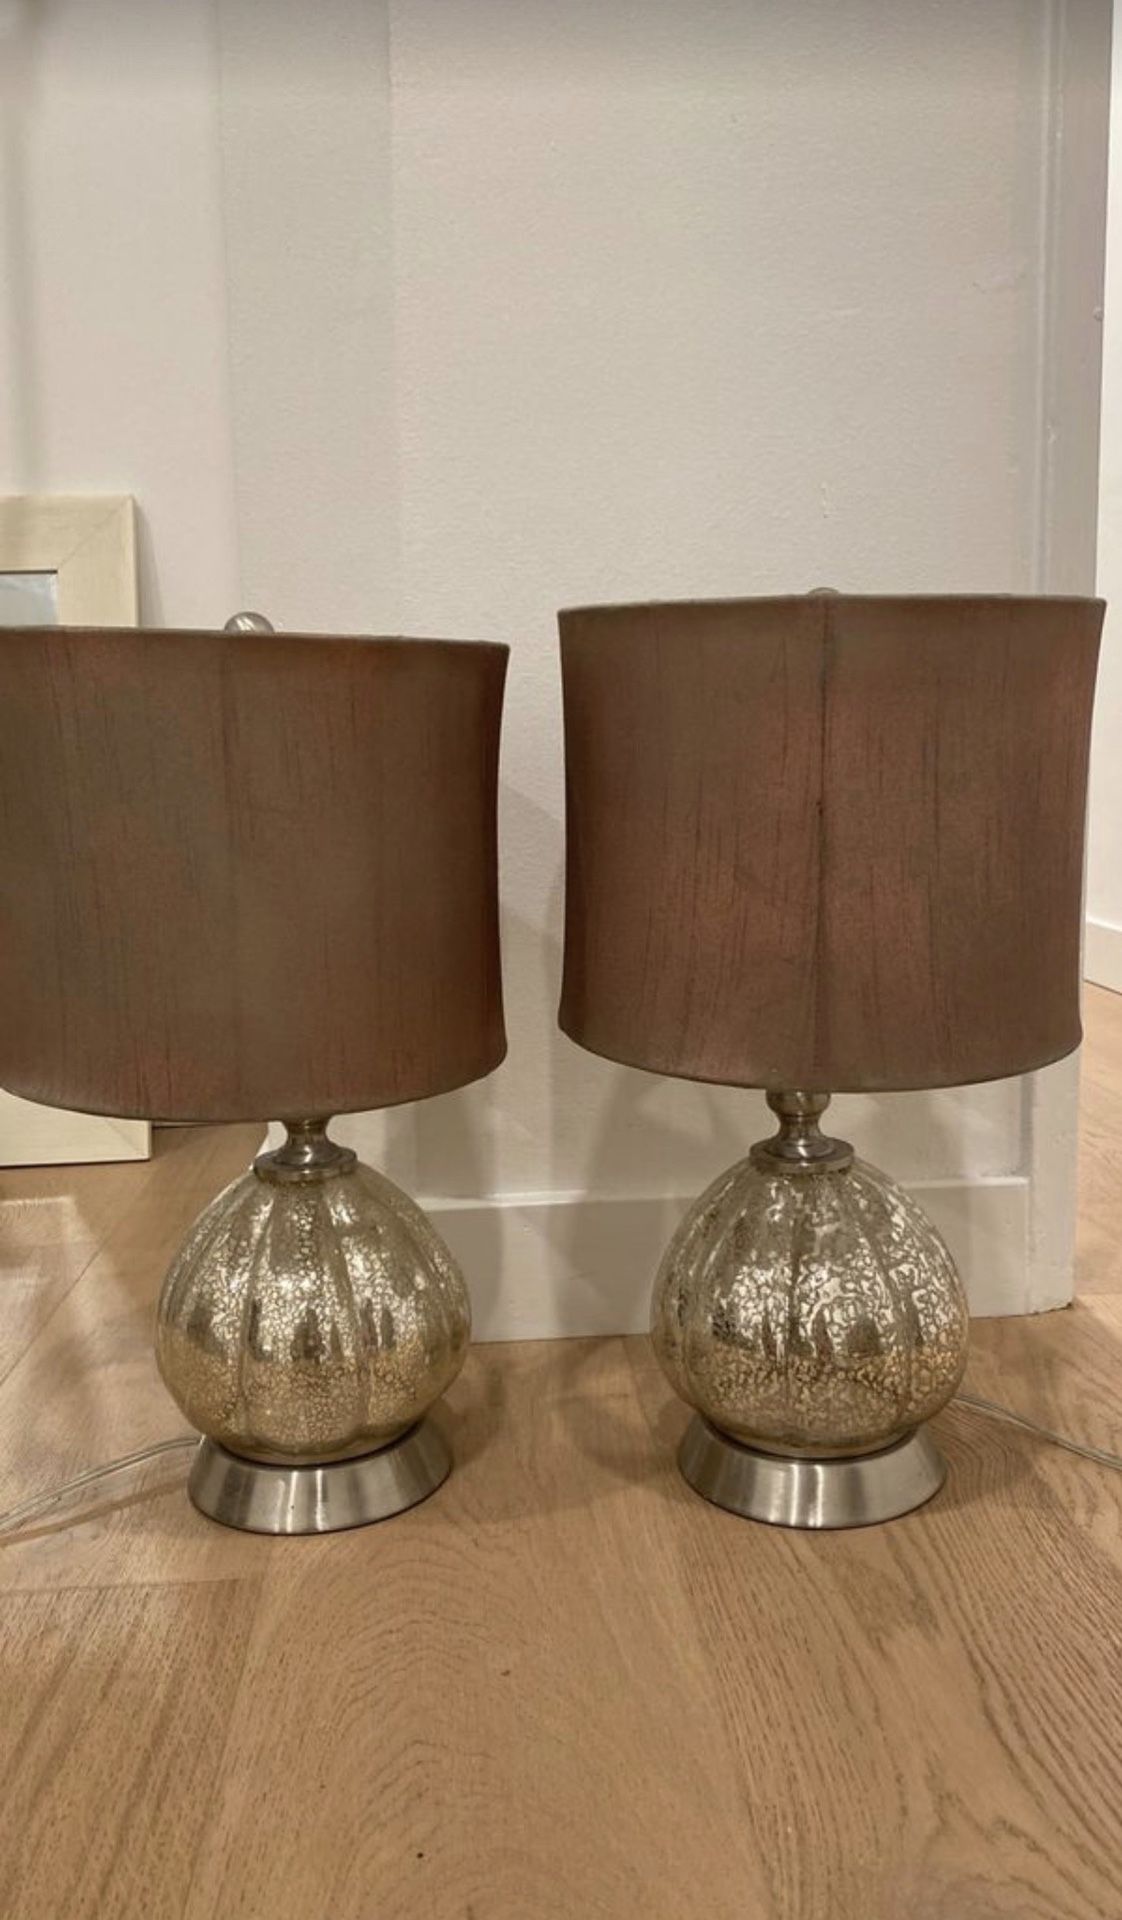 Two cute fashionable lamps